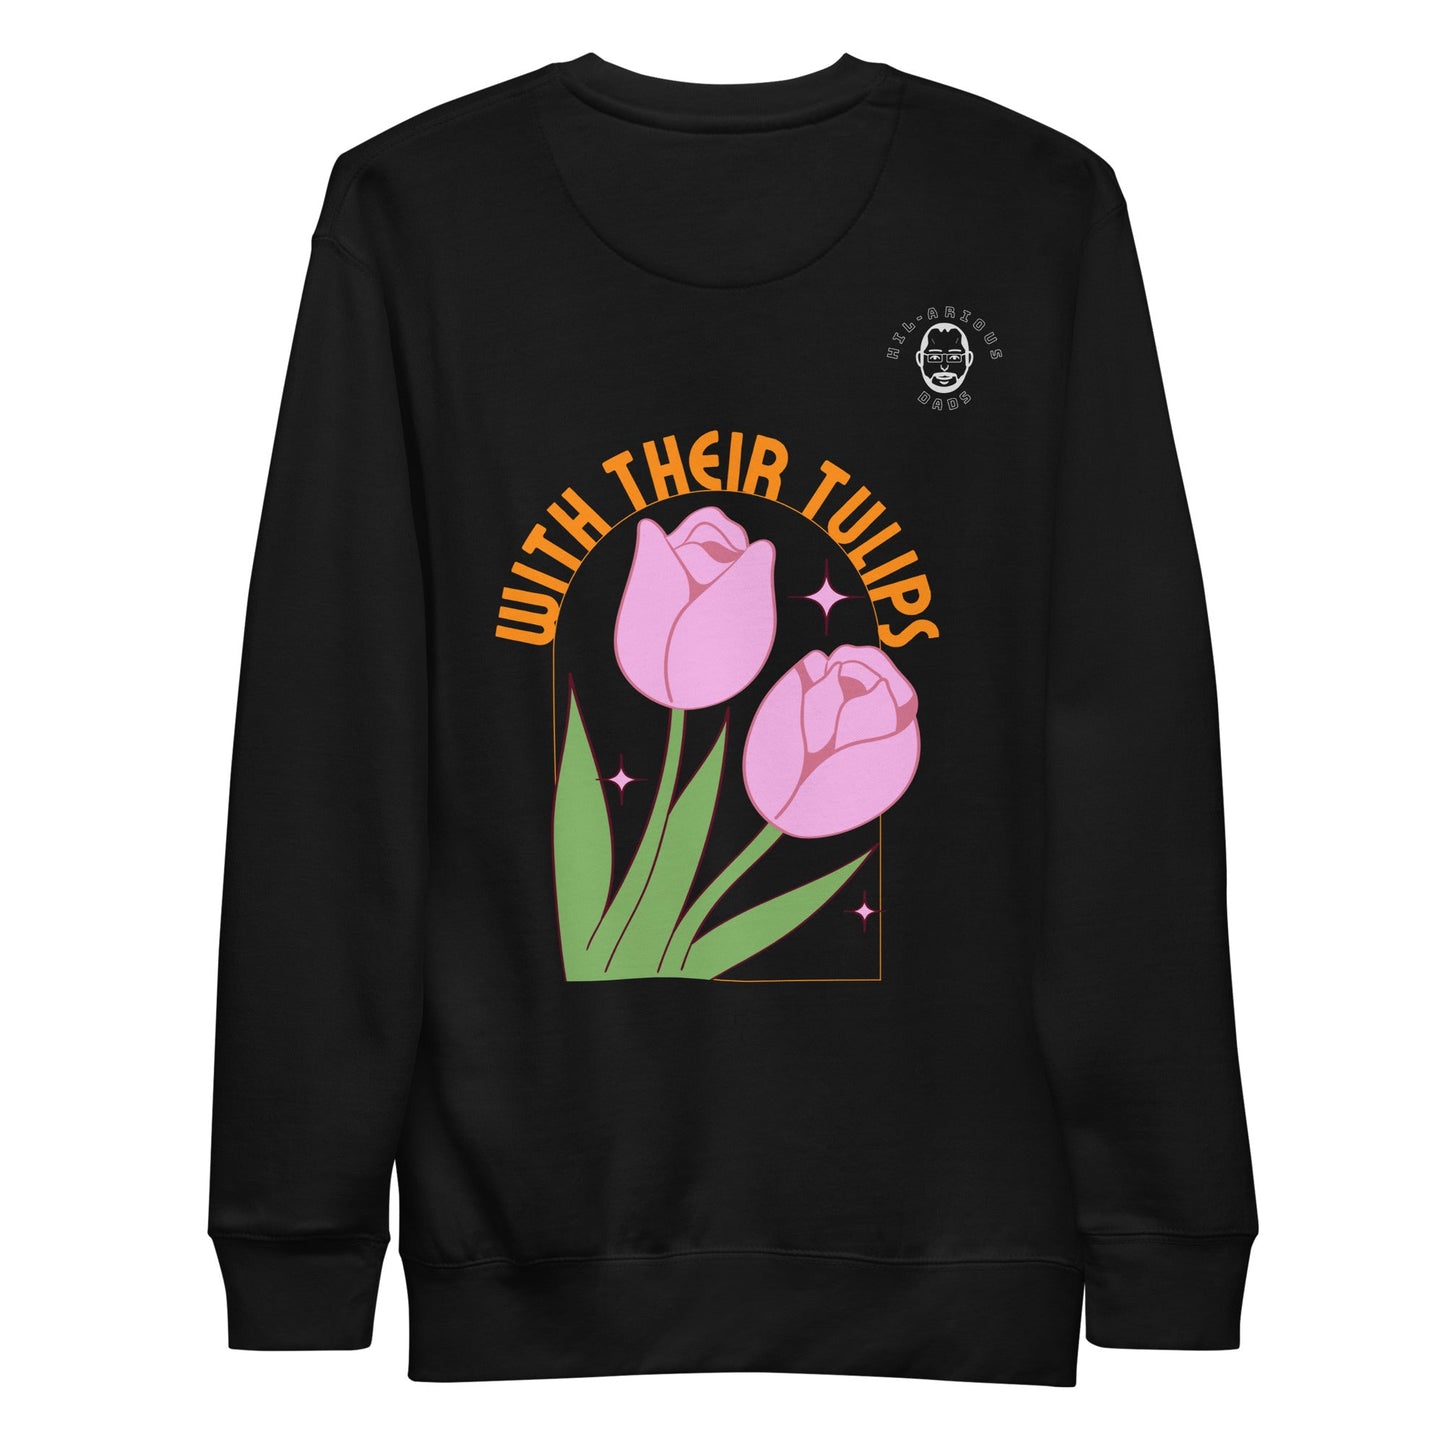 How do April flowers kiss?-Sweatshirt - Hil-arious Dads